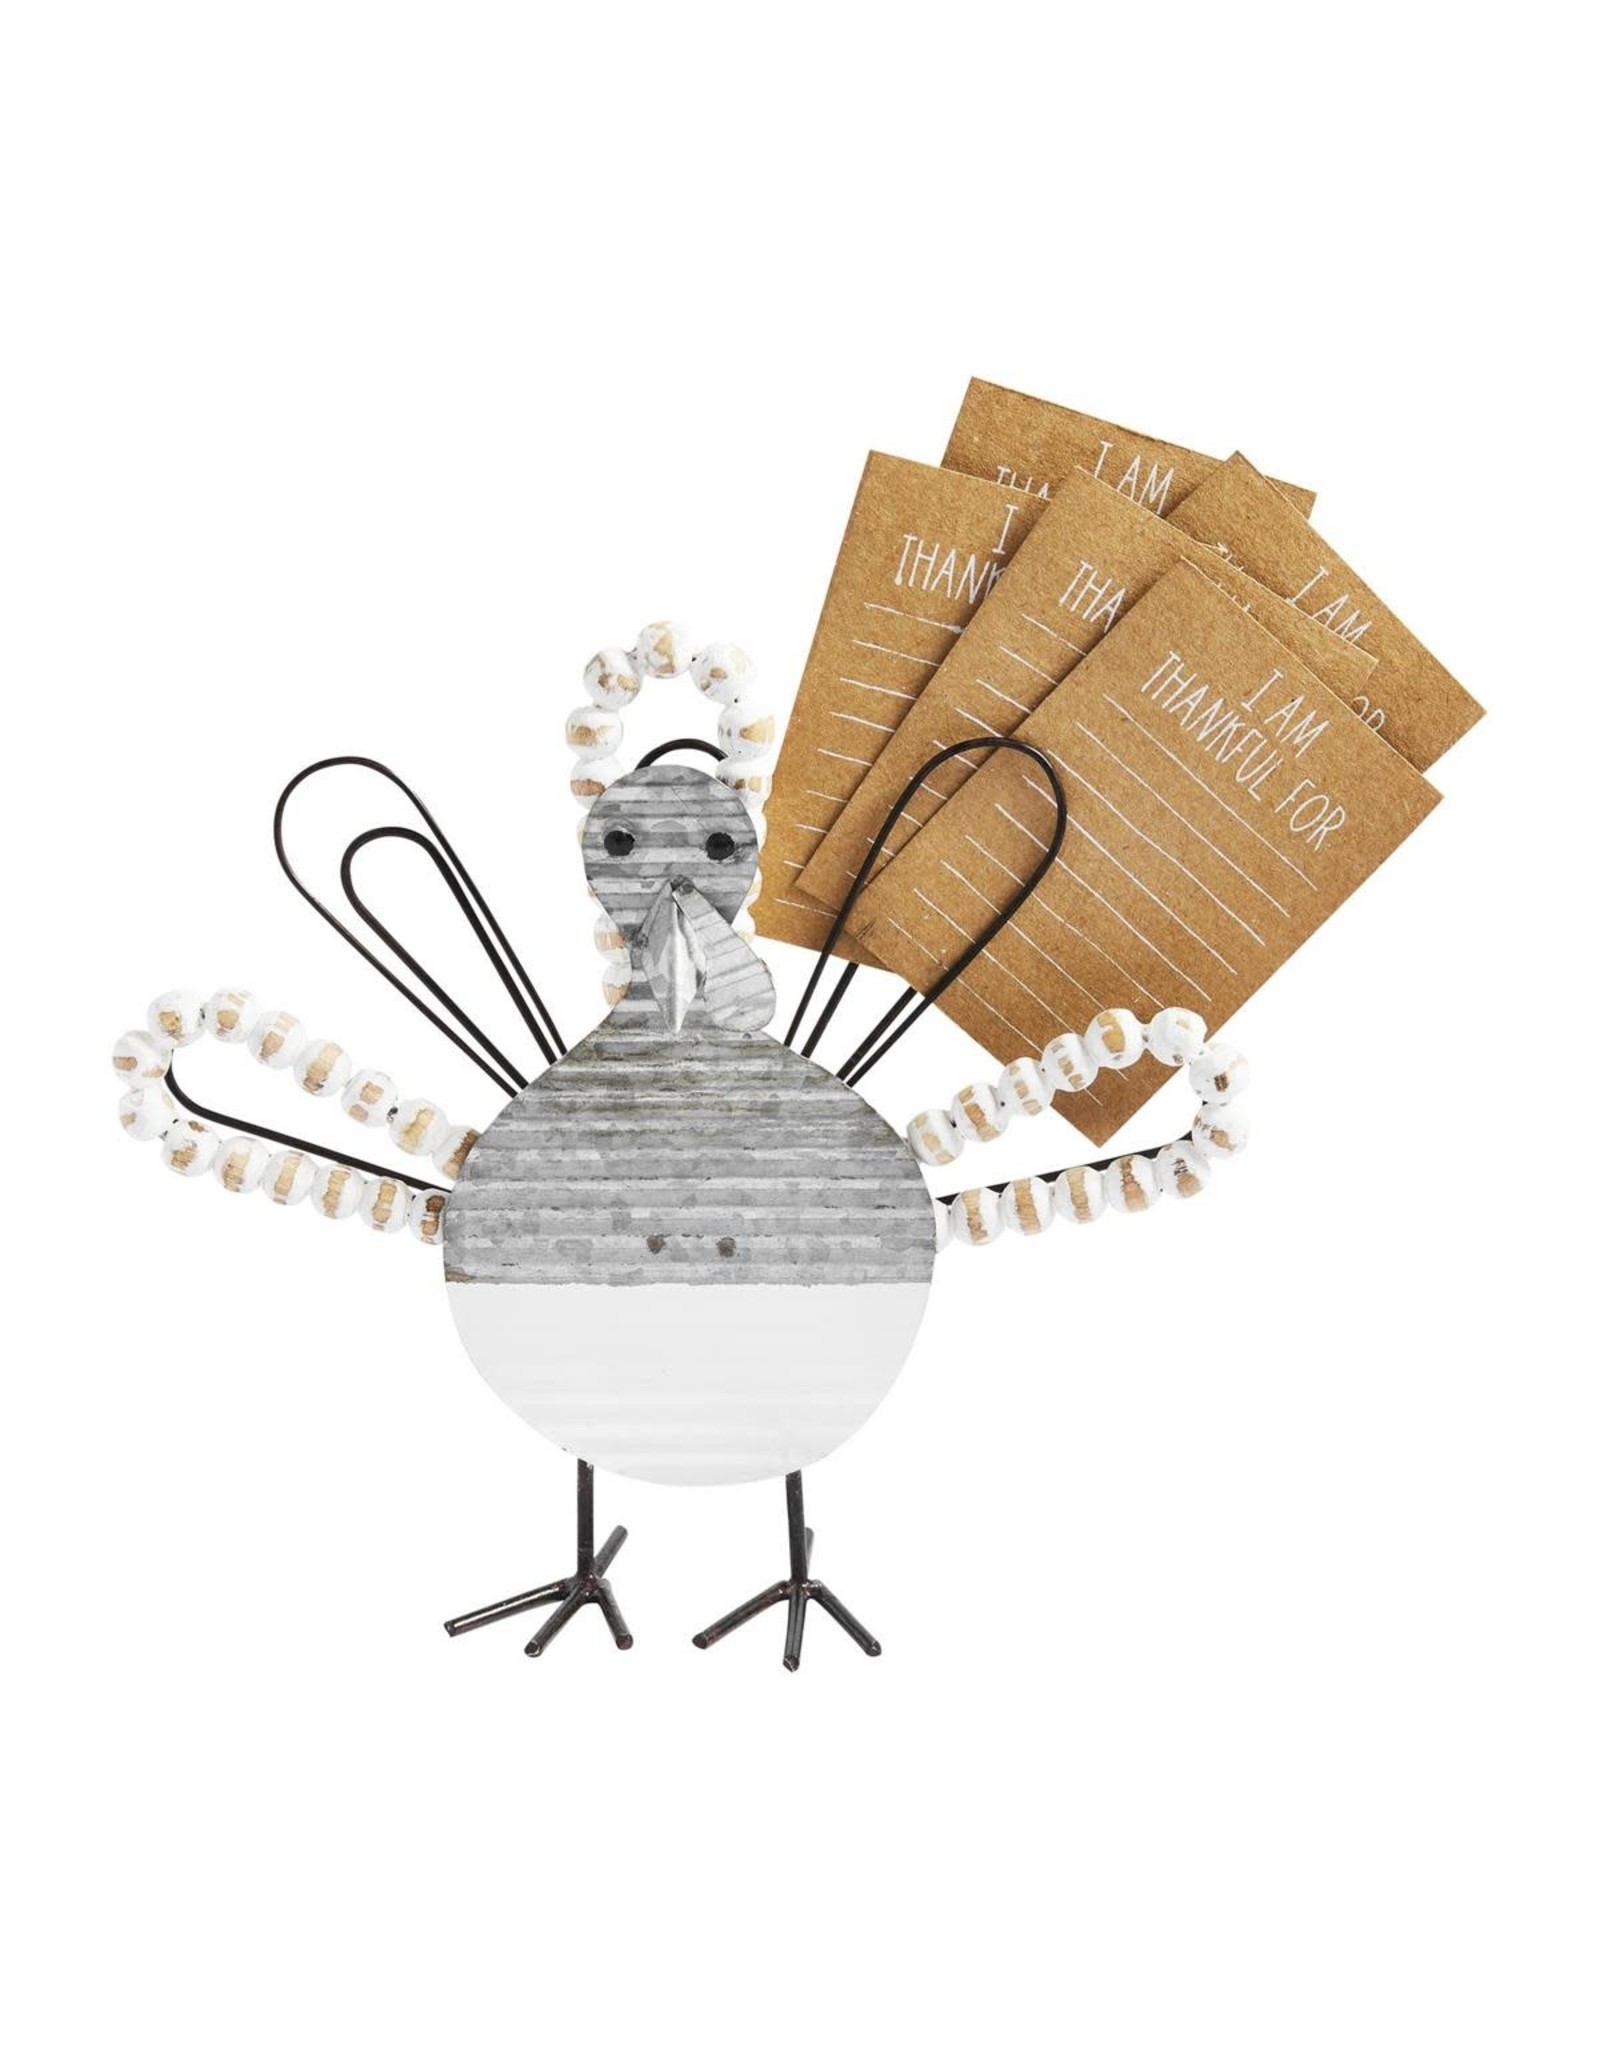 Mud Pie Thankful Turkey Card Holder With 5 - I Am Thankful For - Cards